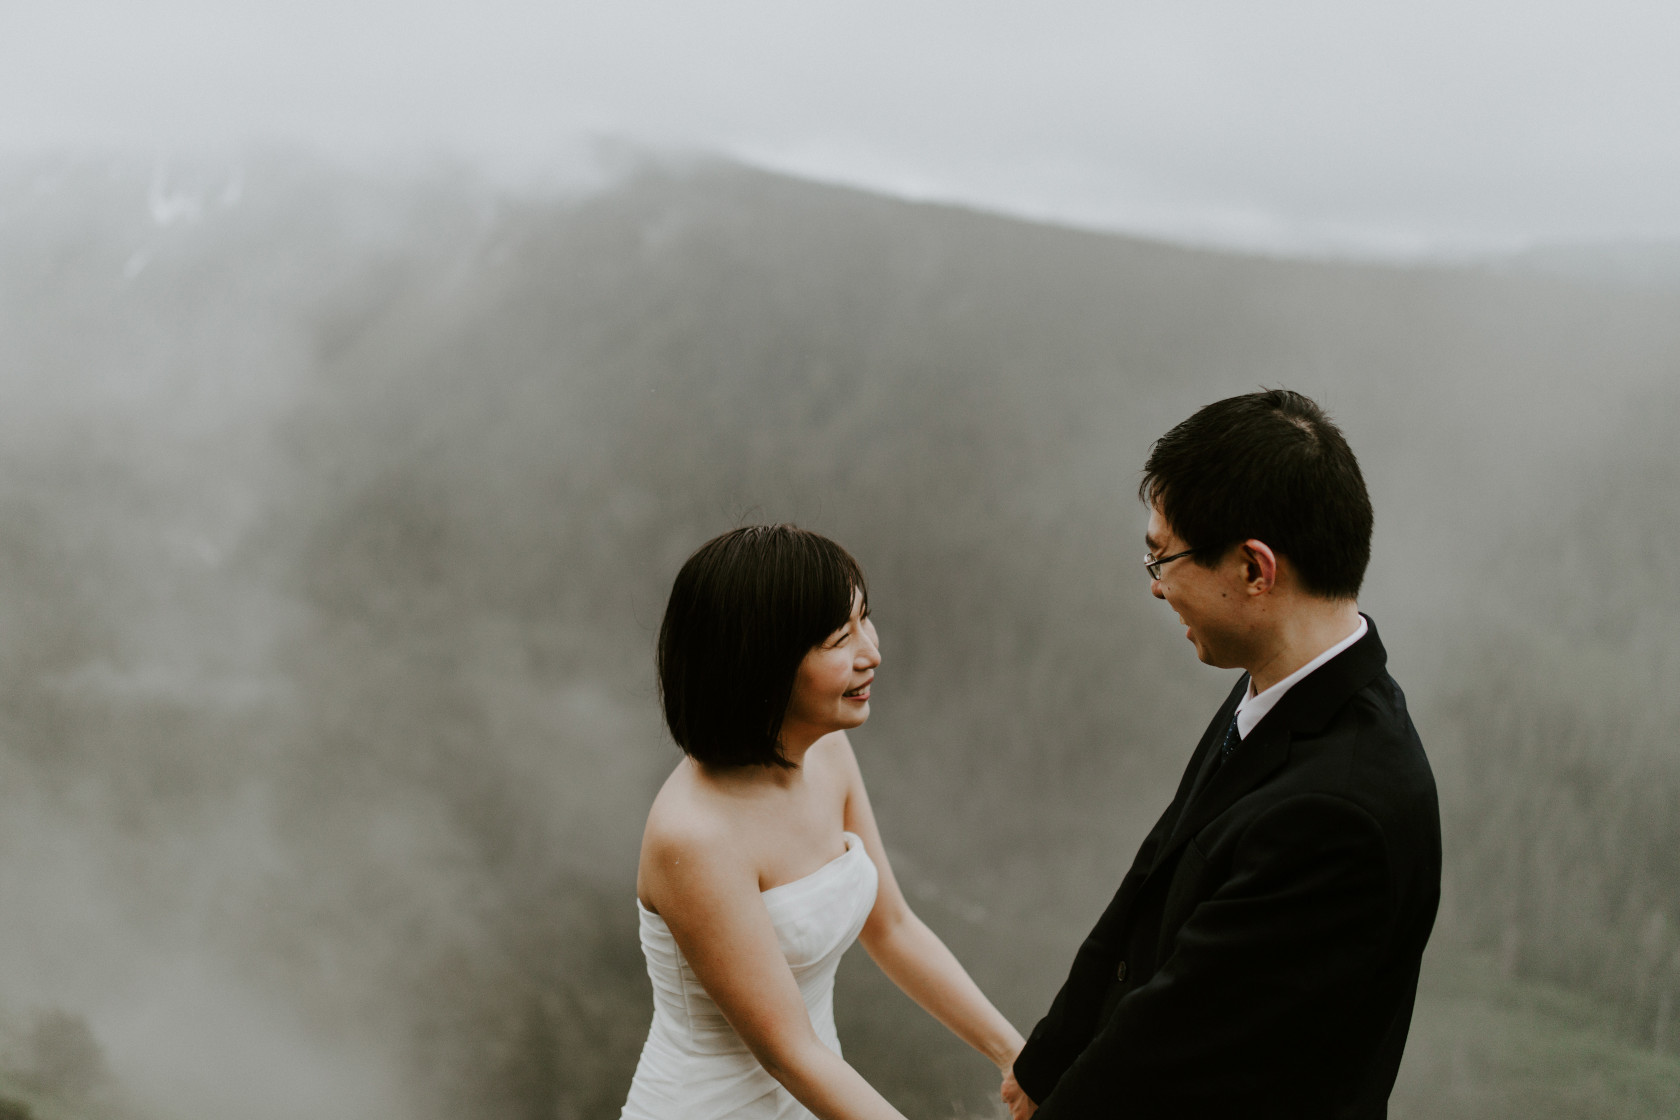 Valerie and Alex admiring one another. Elopement wedding photography at Mount Hood by Sienna Plus Josh.